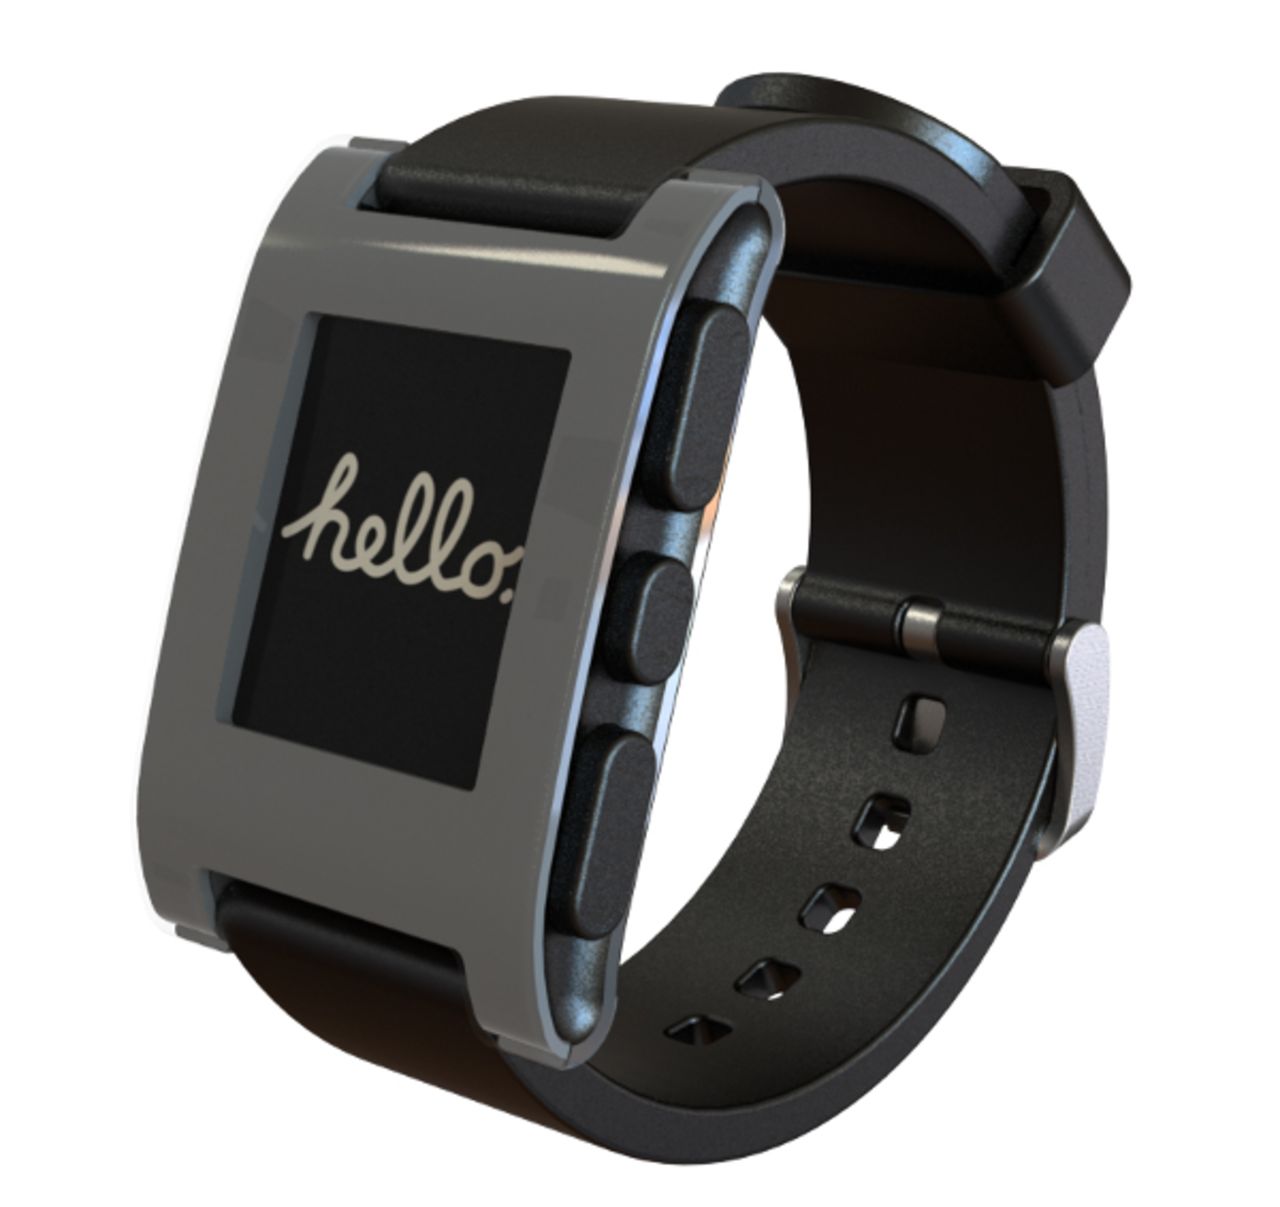 The Pebble Watch, which many consider the first commercial smartwatch, first gained attention by pulling in more than $10 million through crowdfunding on Kickstarter. Pebble connects to an iPhone or Android via Bluetooth and has a growing slate of its own apps.